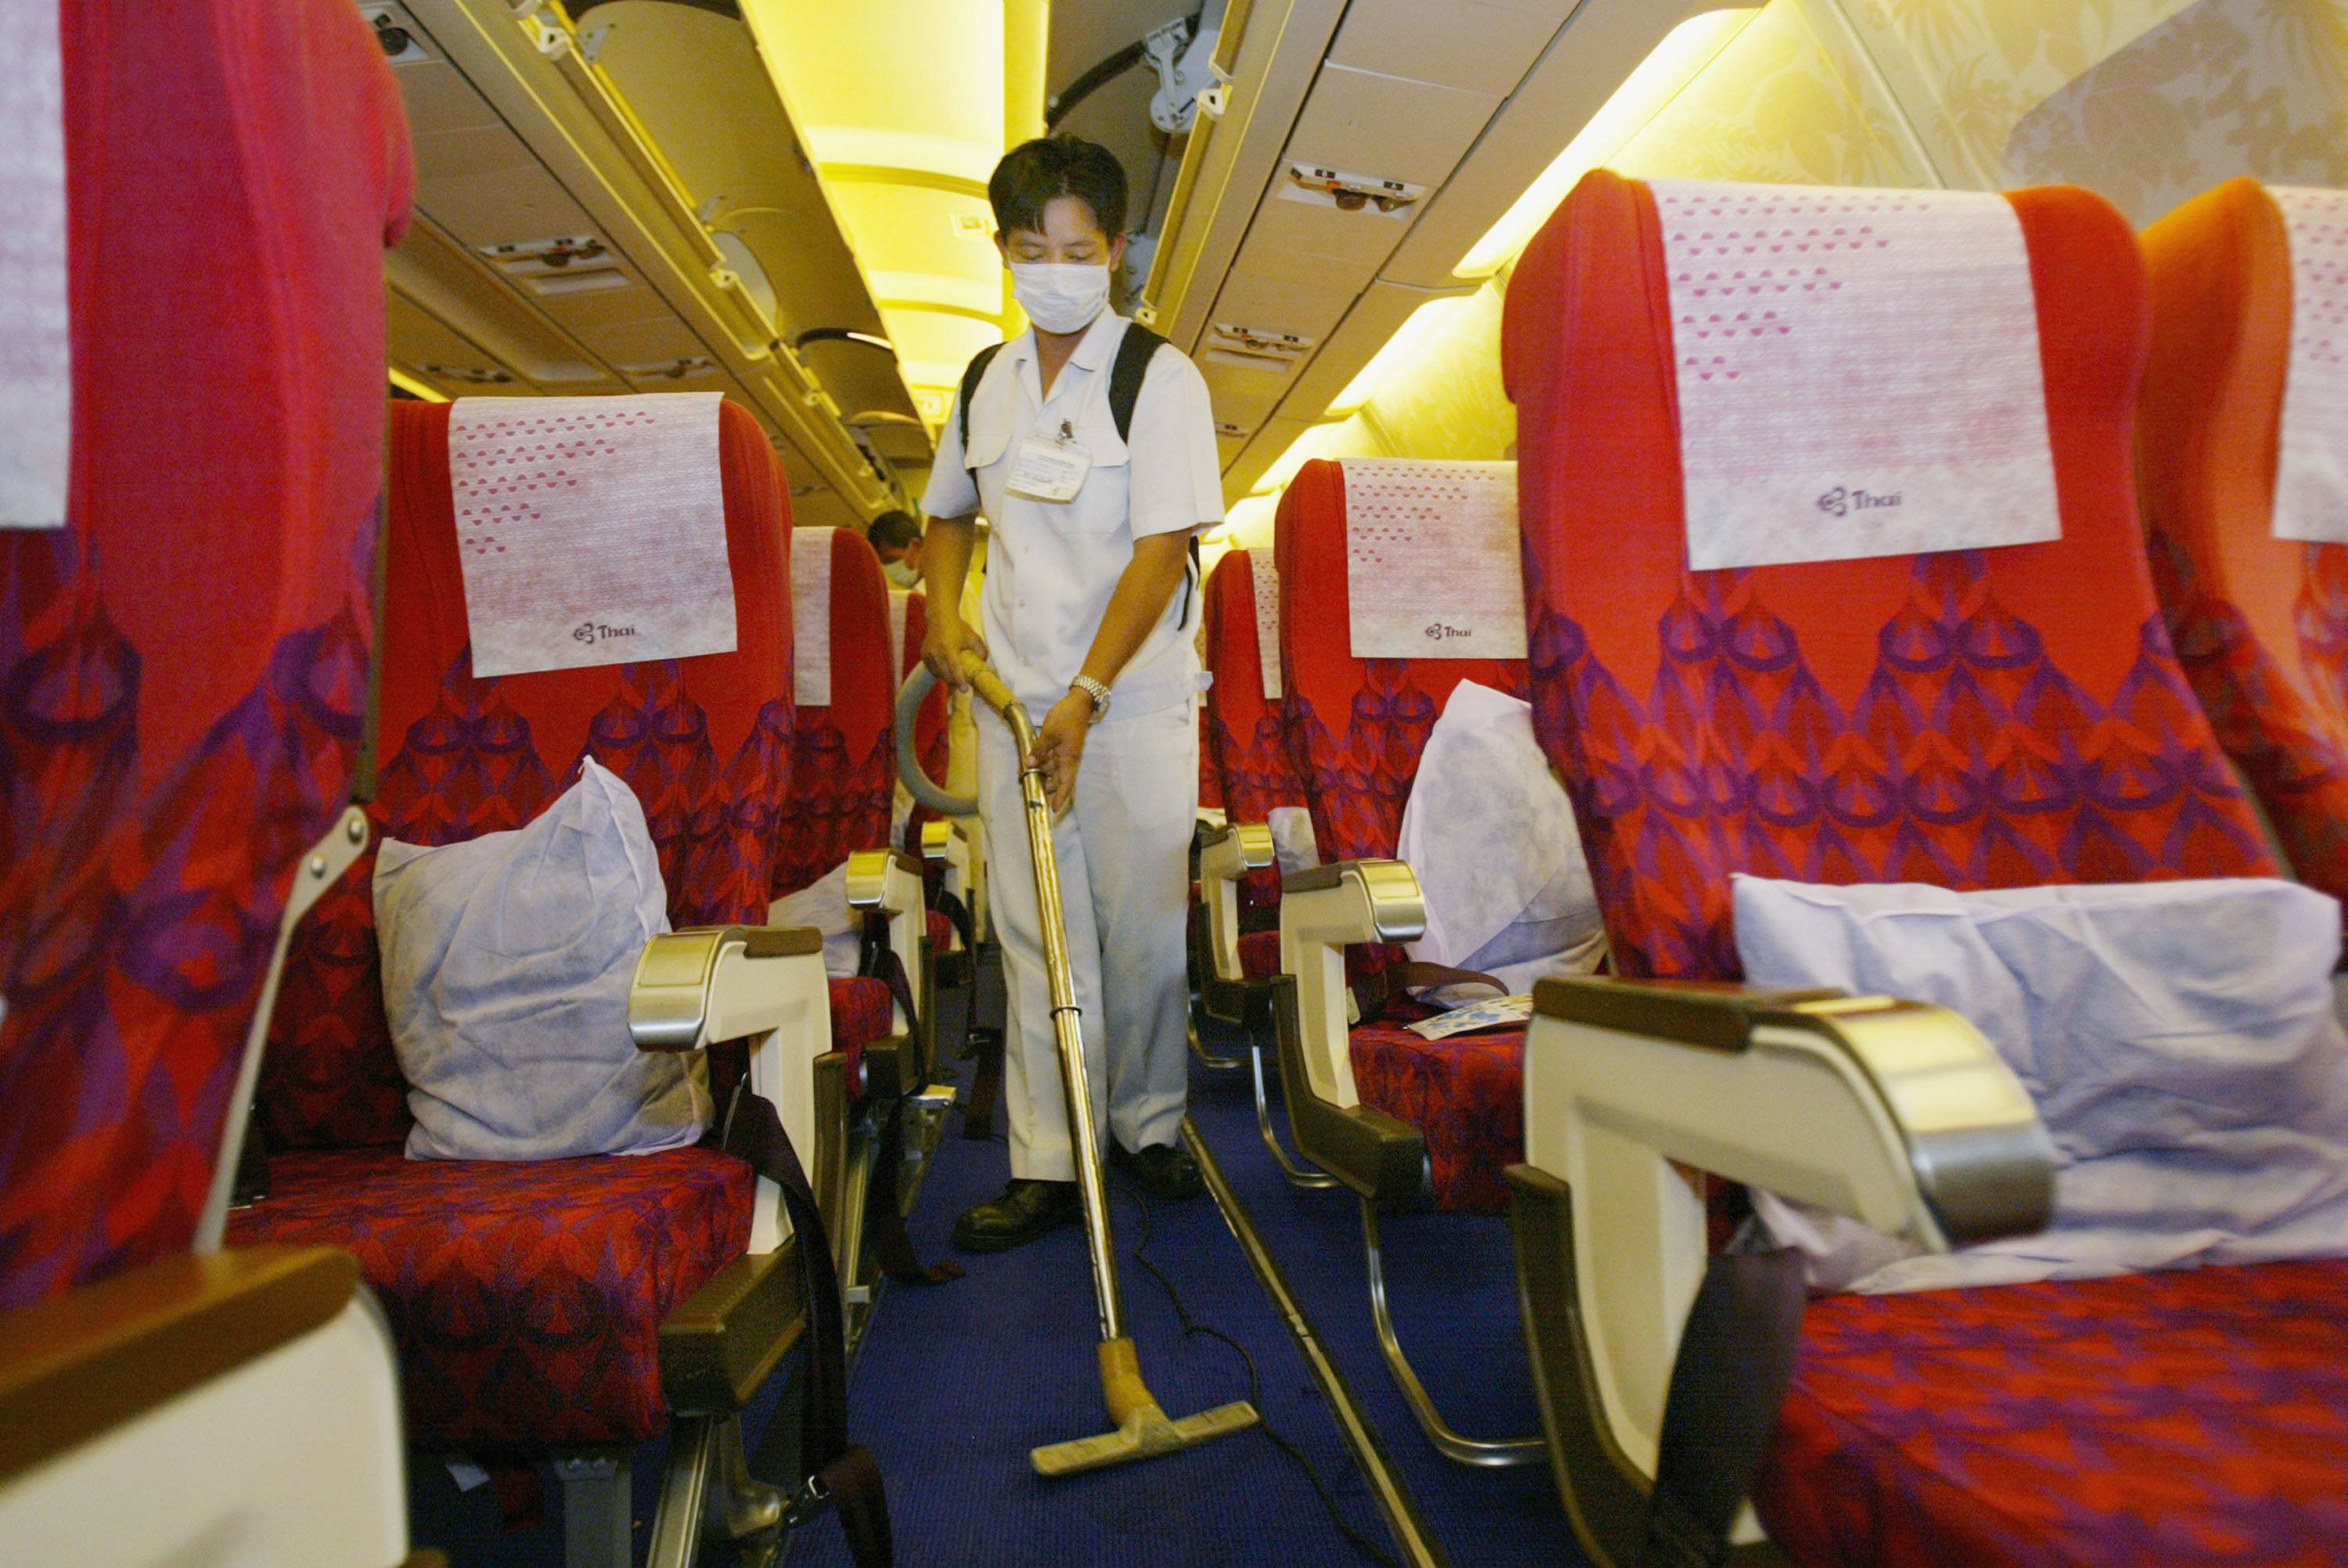 A Thai airlines staff worker cleans the aircraft wearing a surgical mask